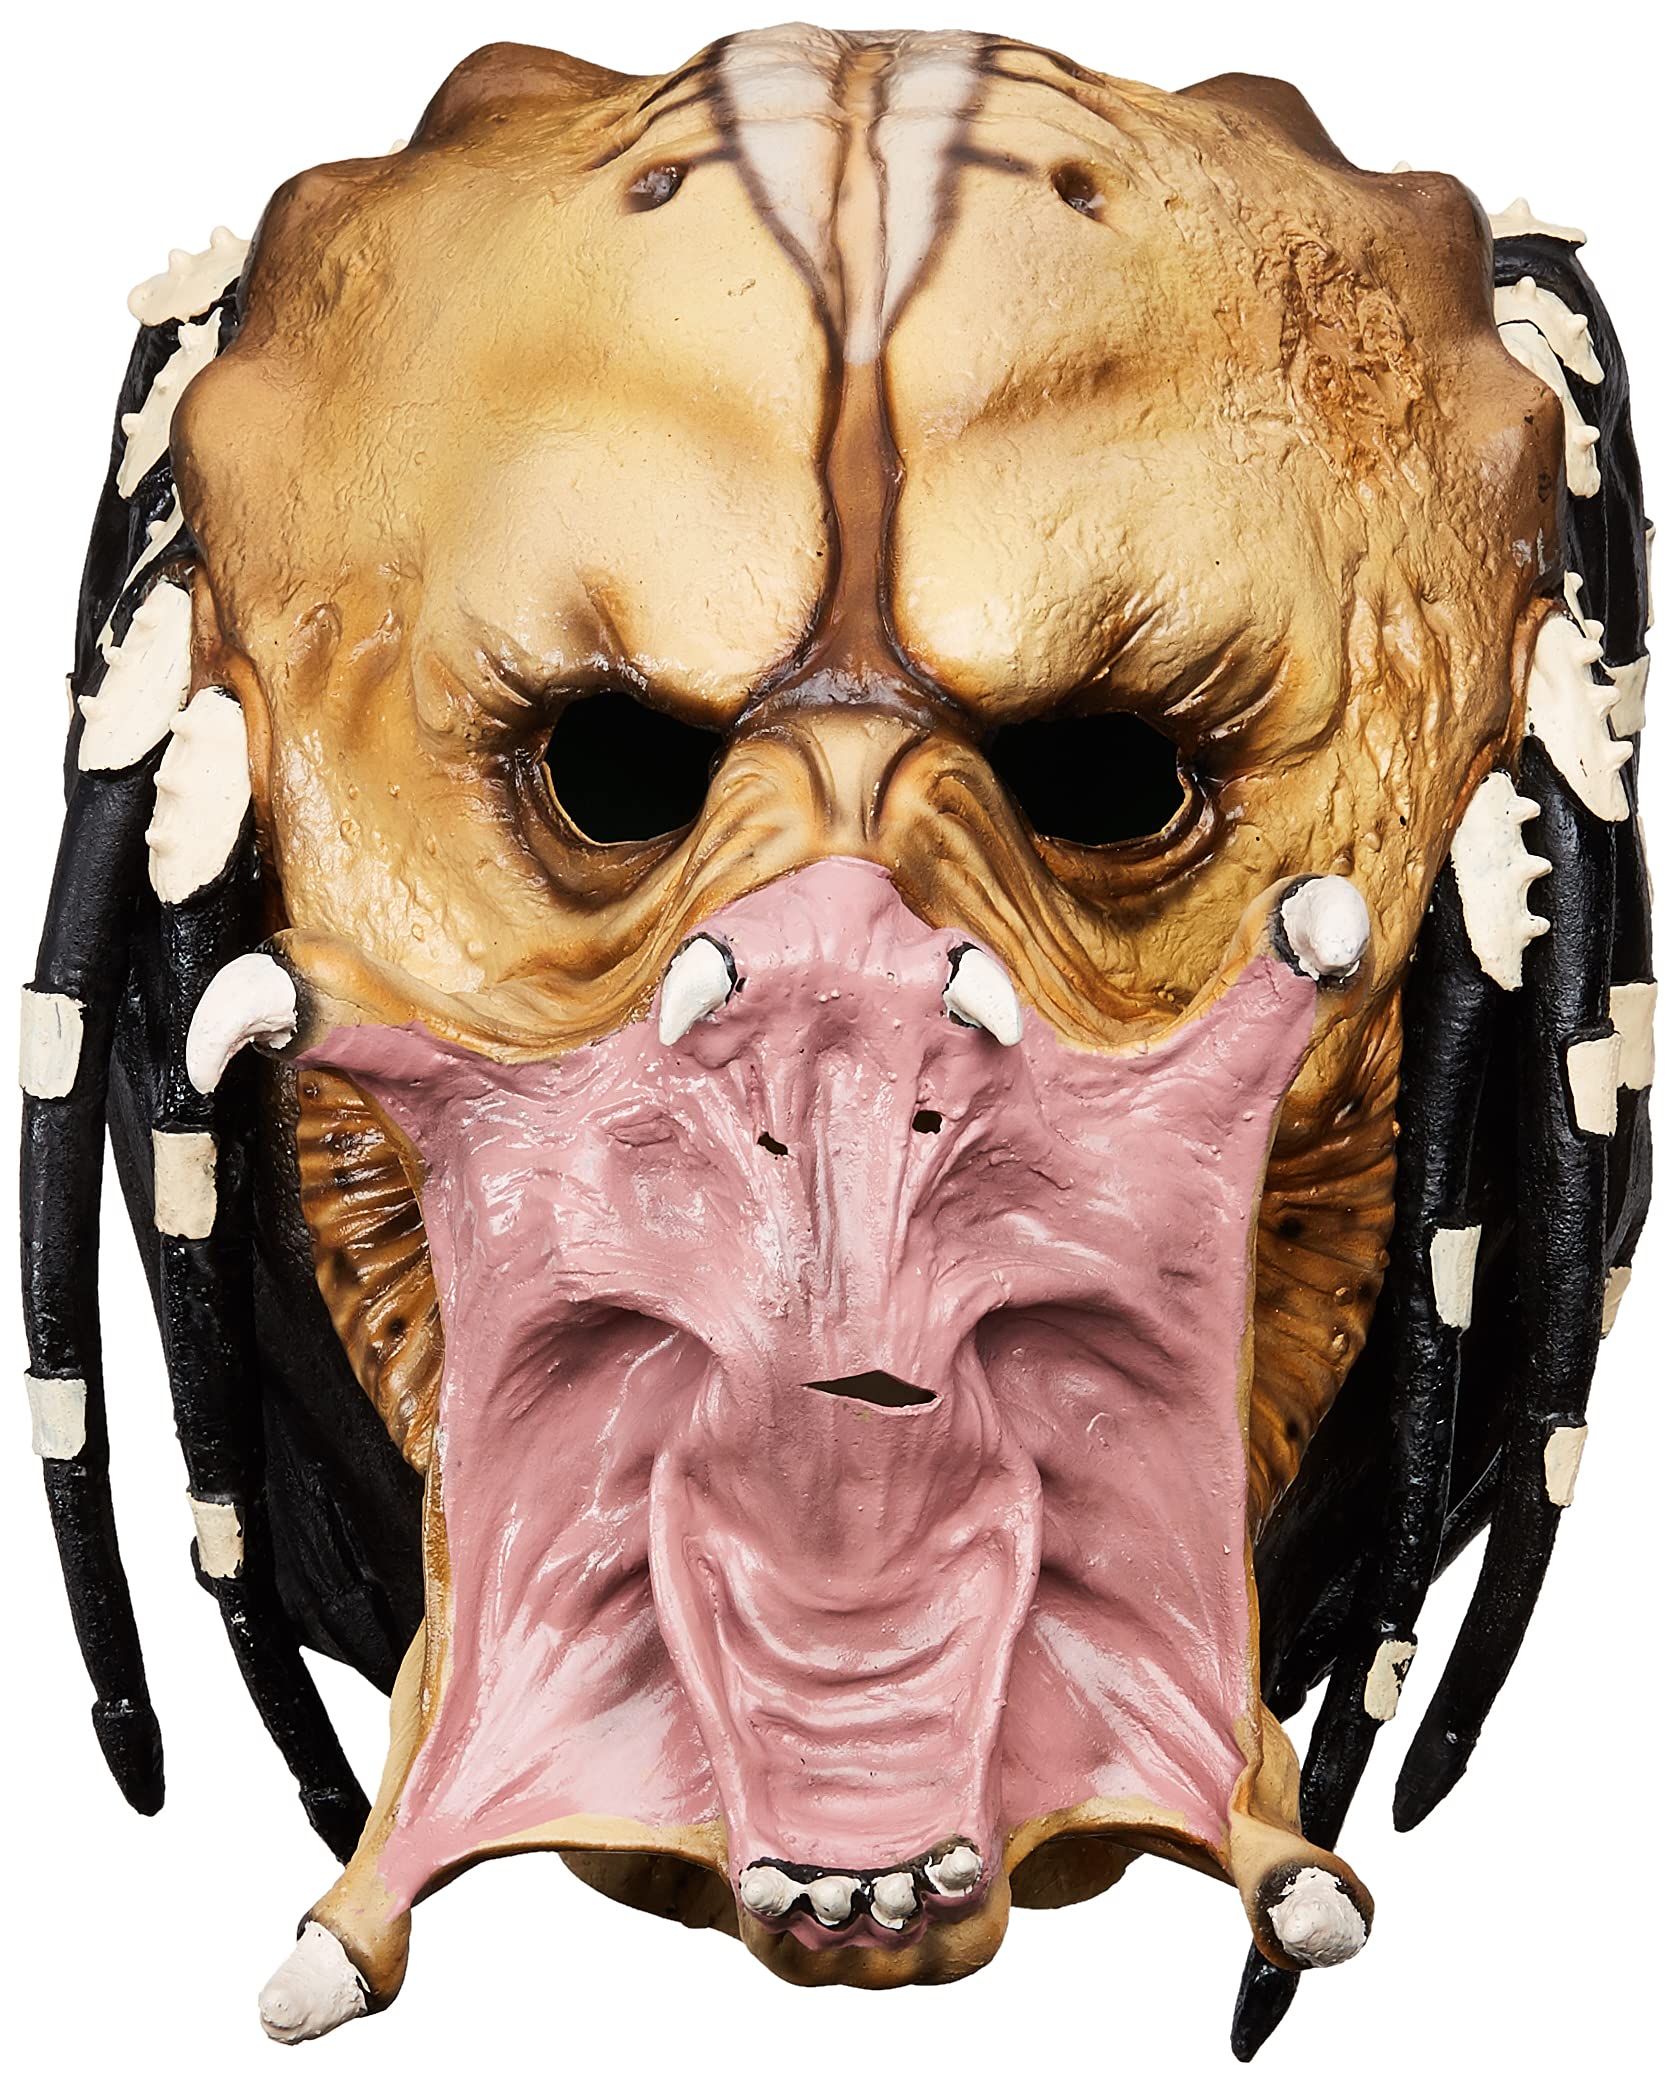 Rubies Predator Deluxe Latex Adult Mask $20.53 + Free Shipping w/ Prime or on Orders $35+